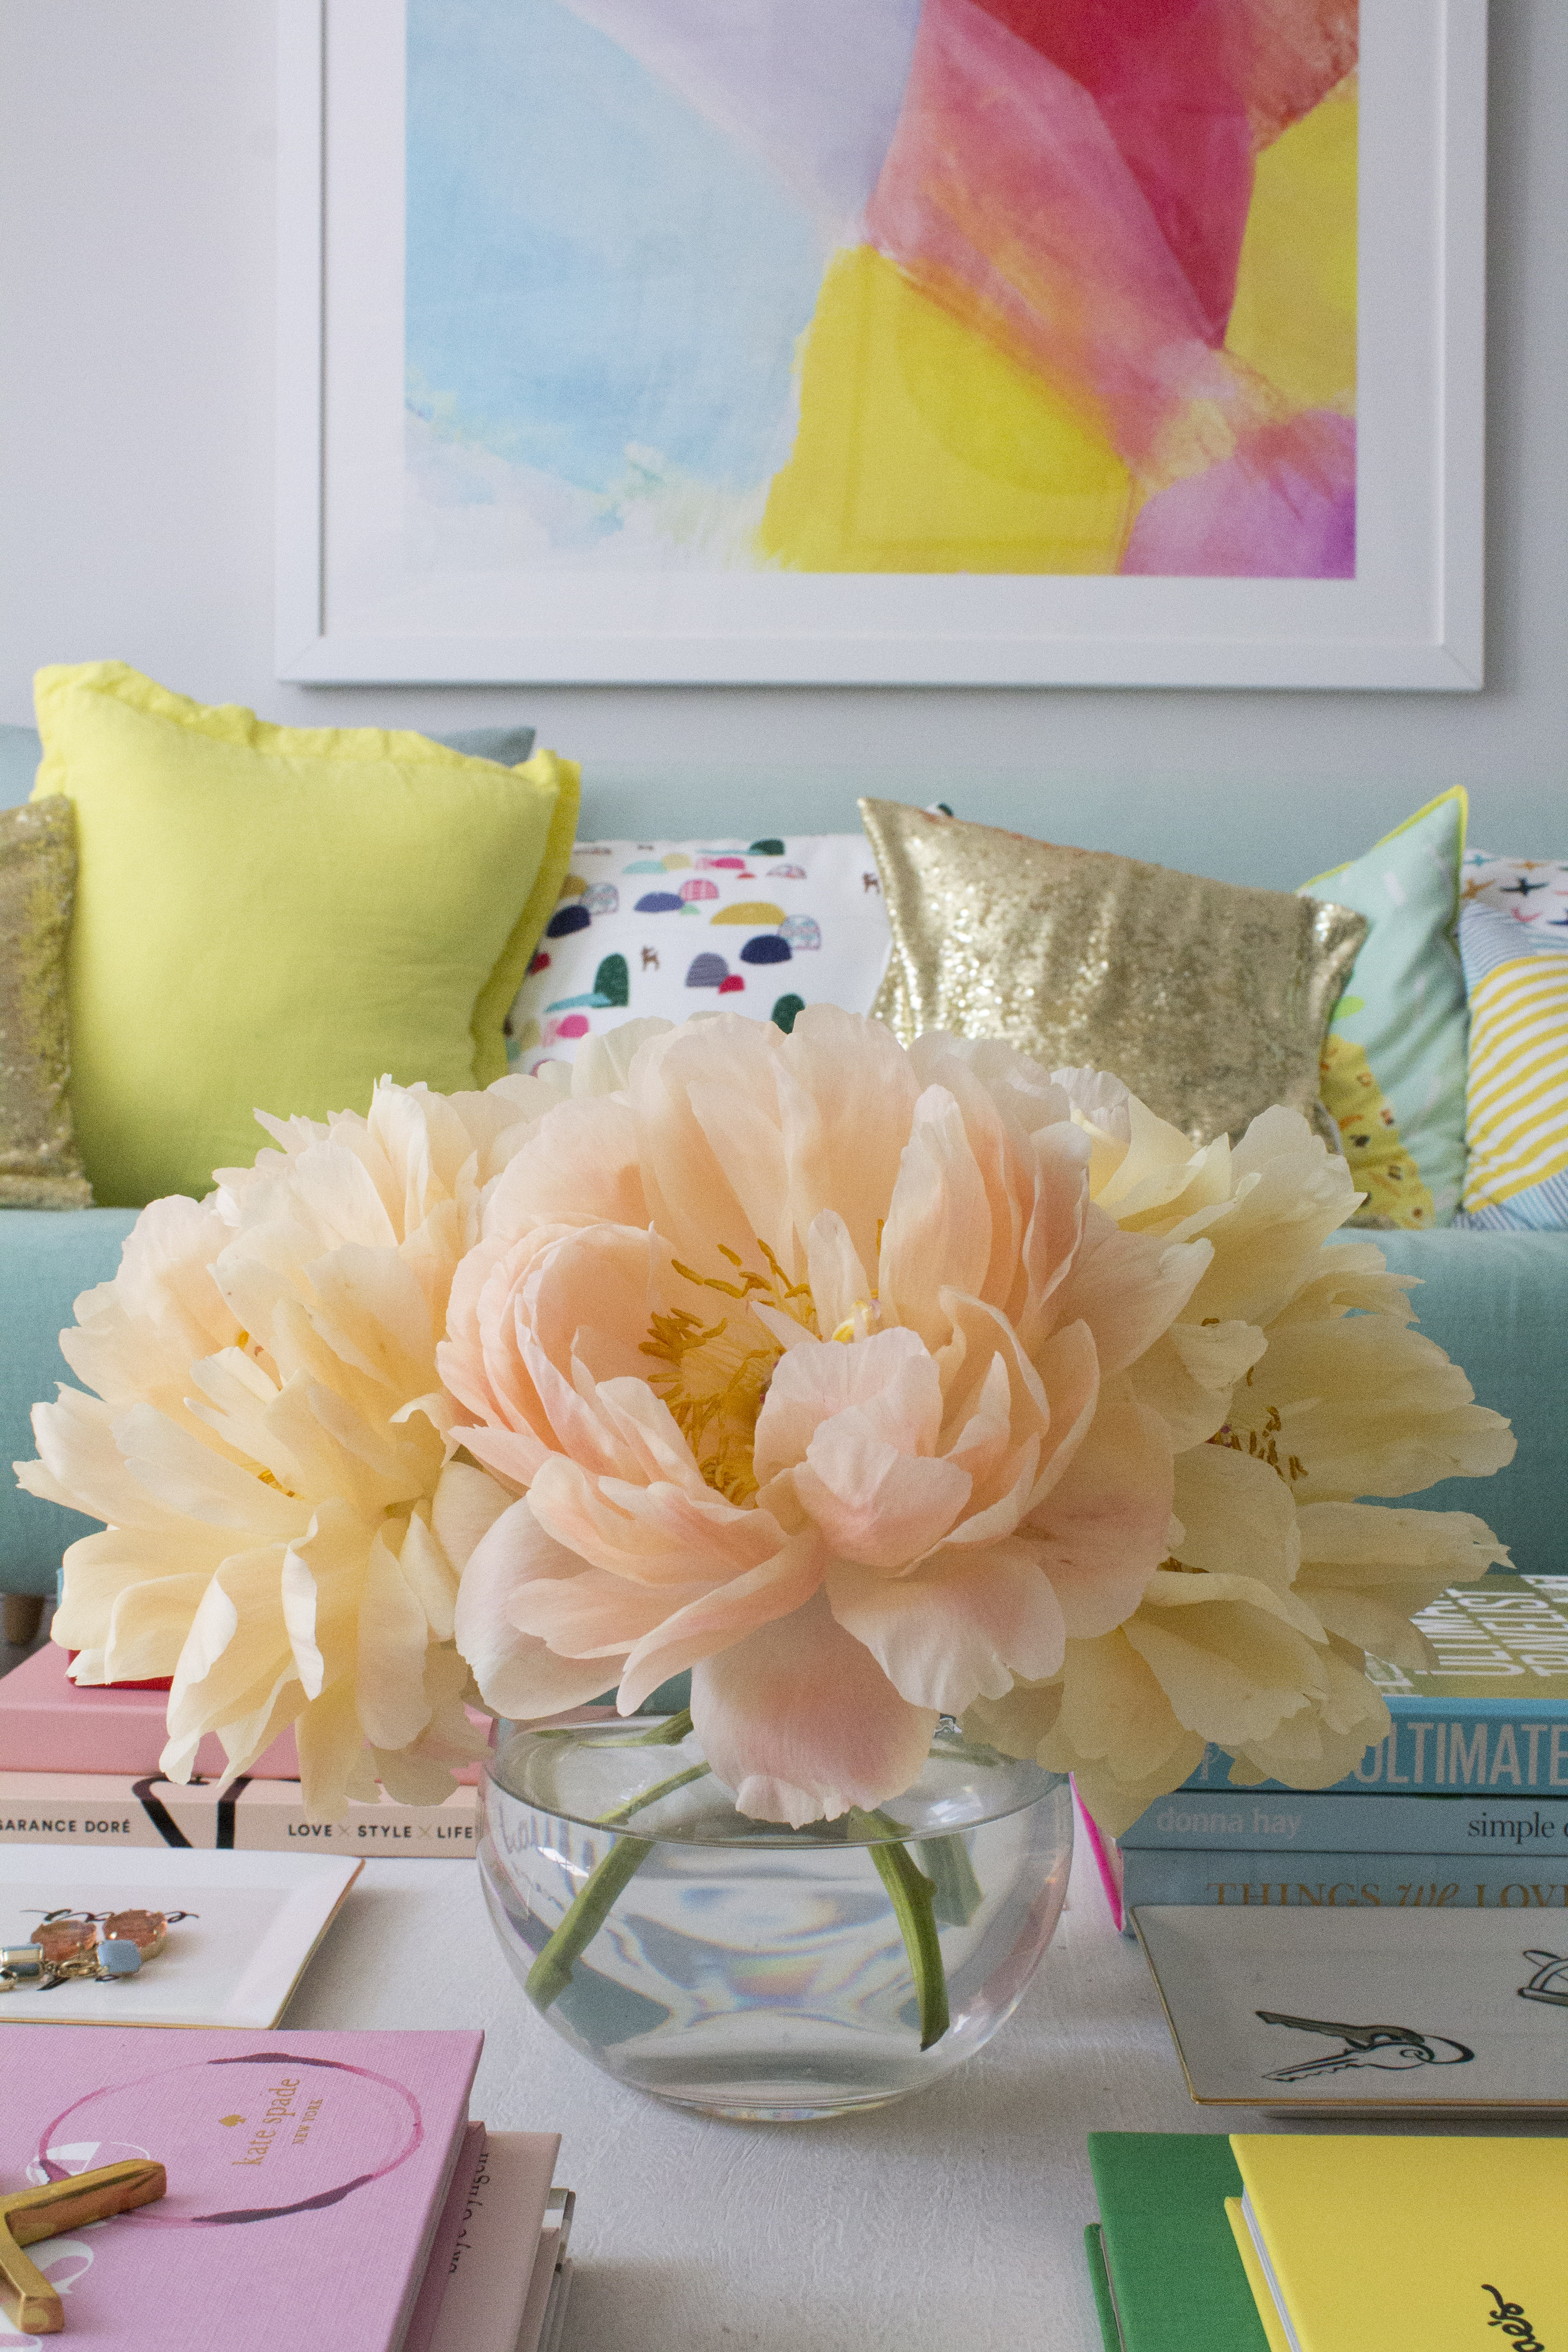 Coral-Sunset-peonies-turned-yellow-photo-by-Geraldine-Tan-of-Little-Big-Bell-blog